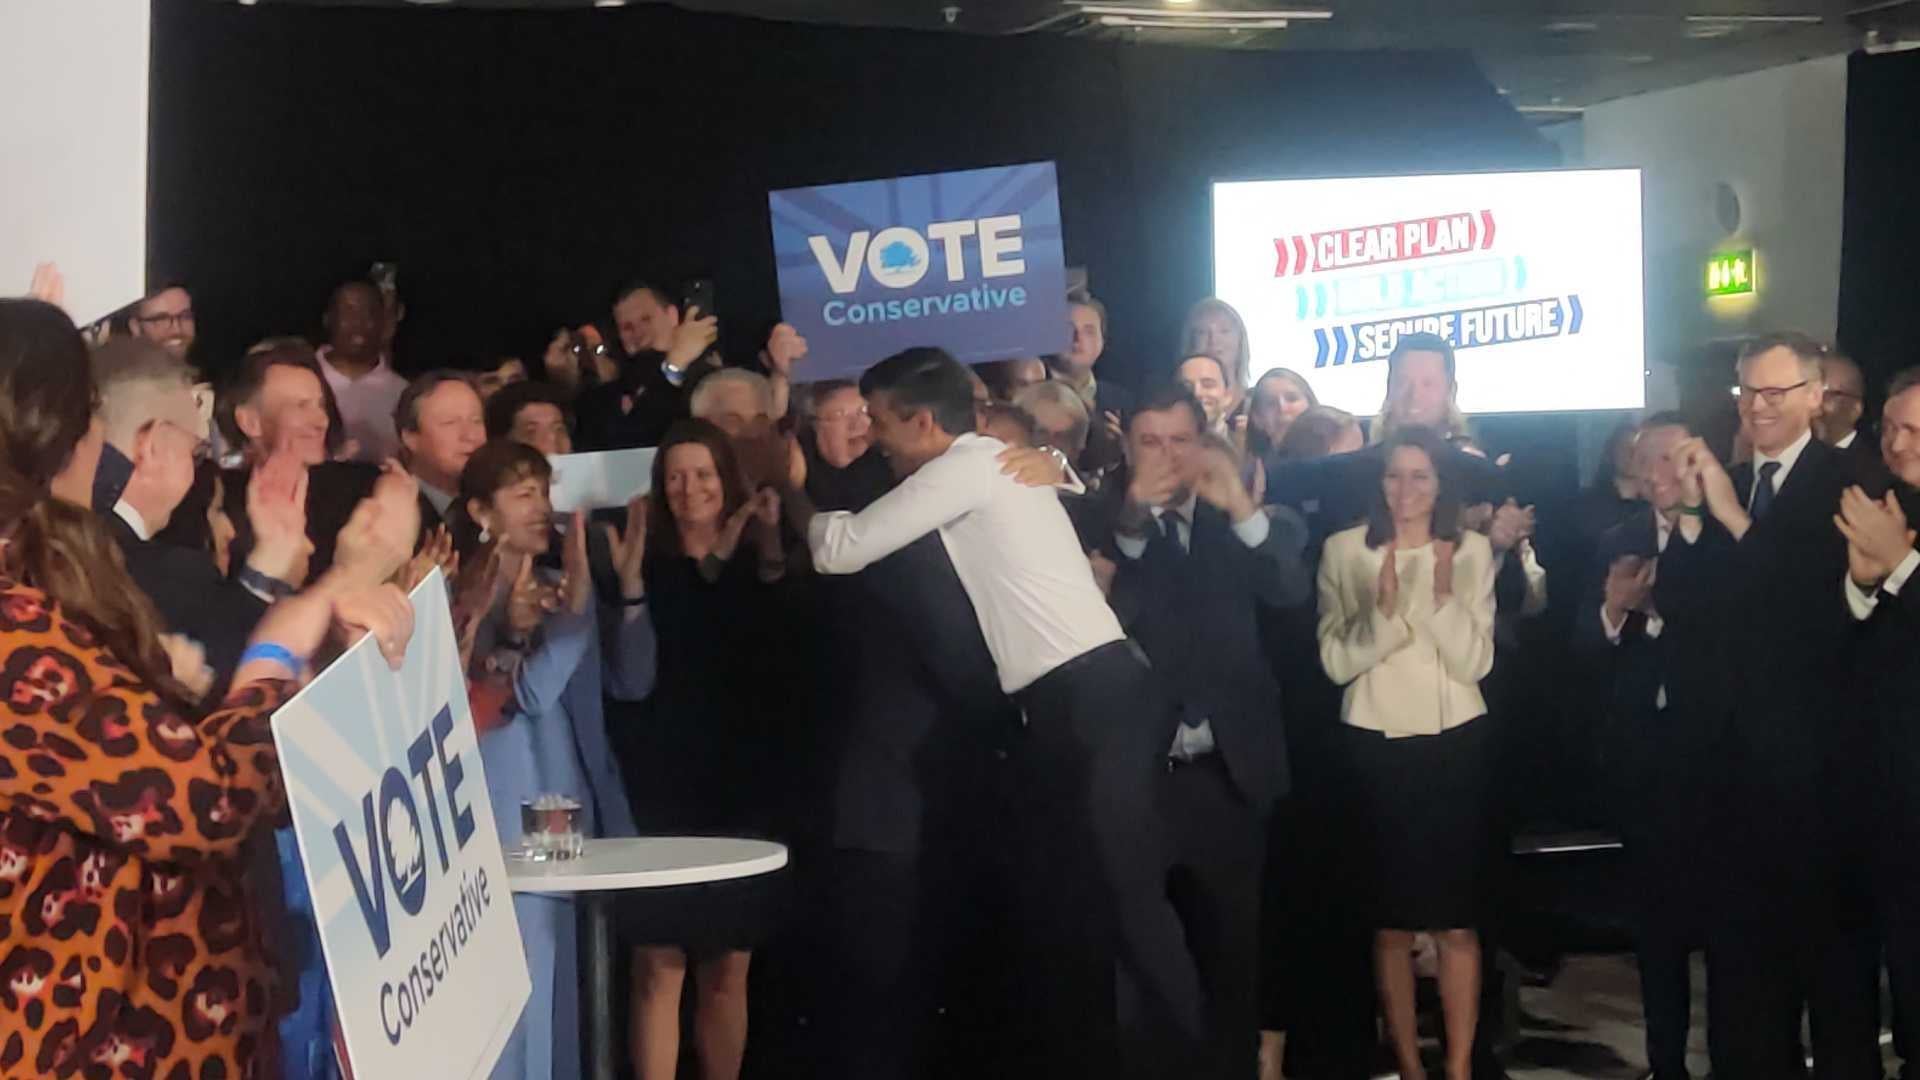 Mr Cleverly and Mr Sunak hug at the campaign launch